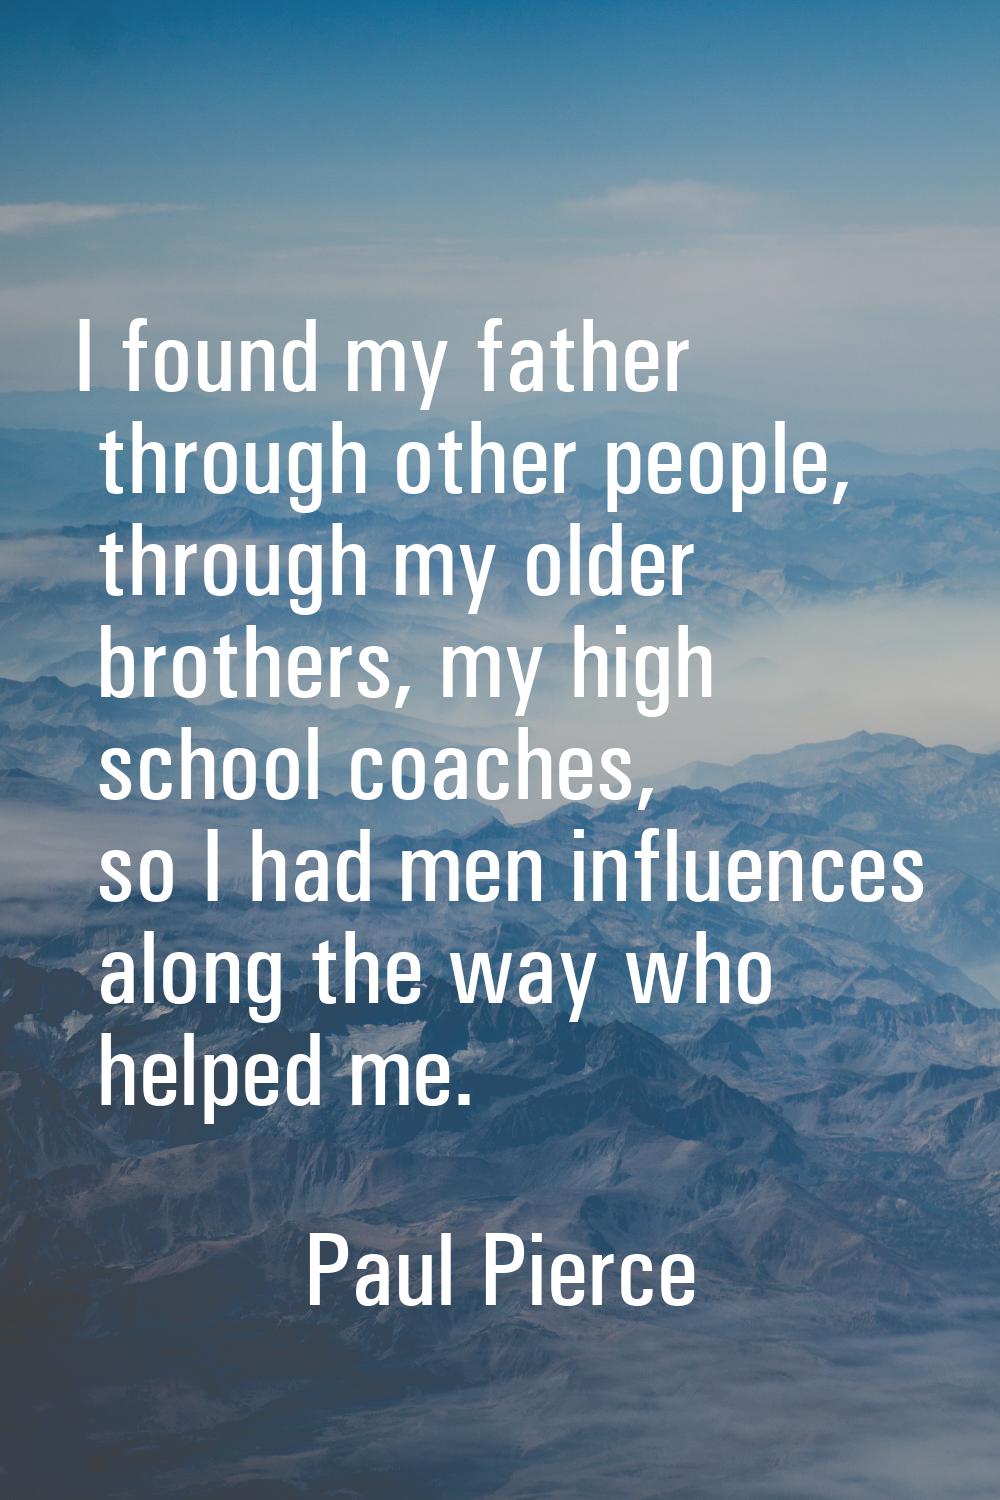 I found my father through other people, through my older brothers, my high school coaches, so I had